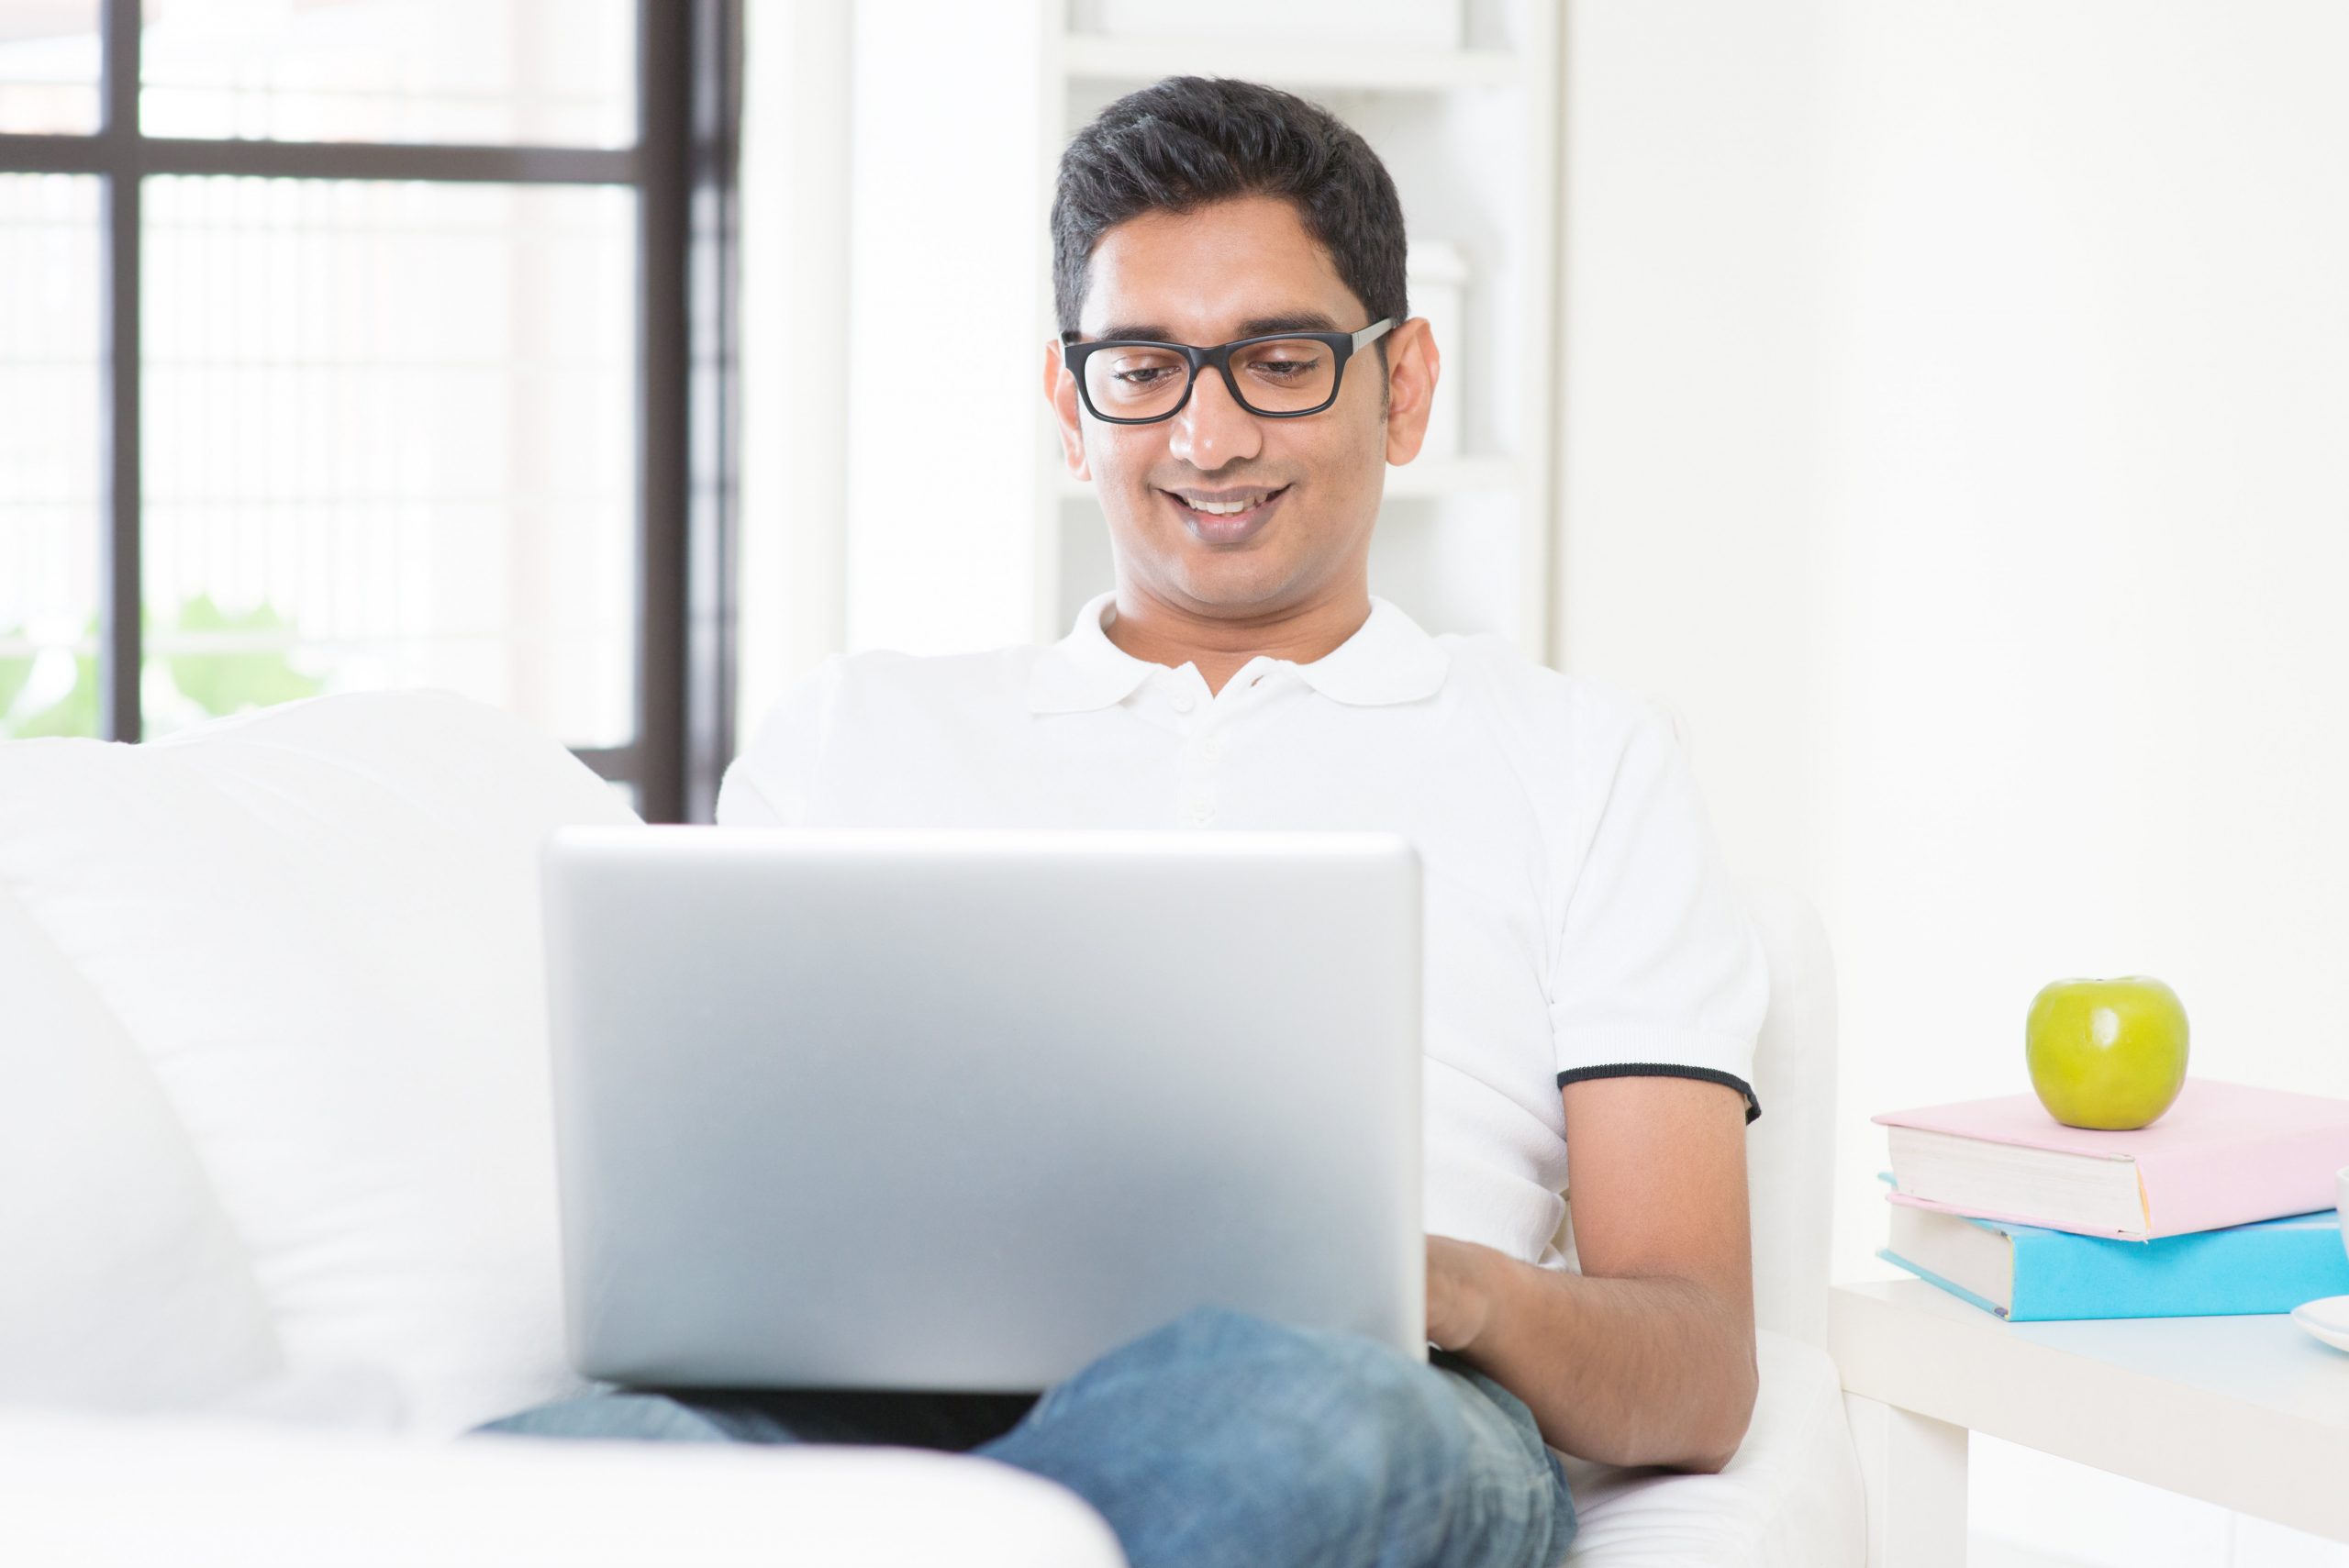 Man smiling using laptop on white couch.